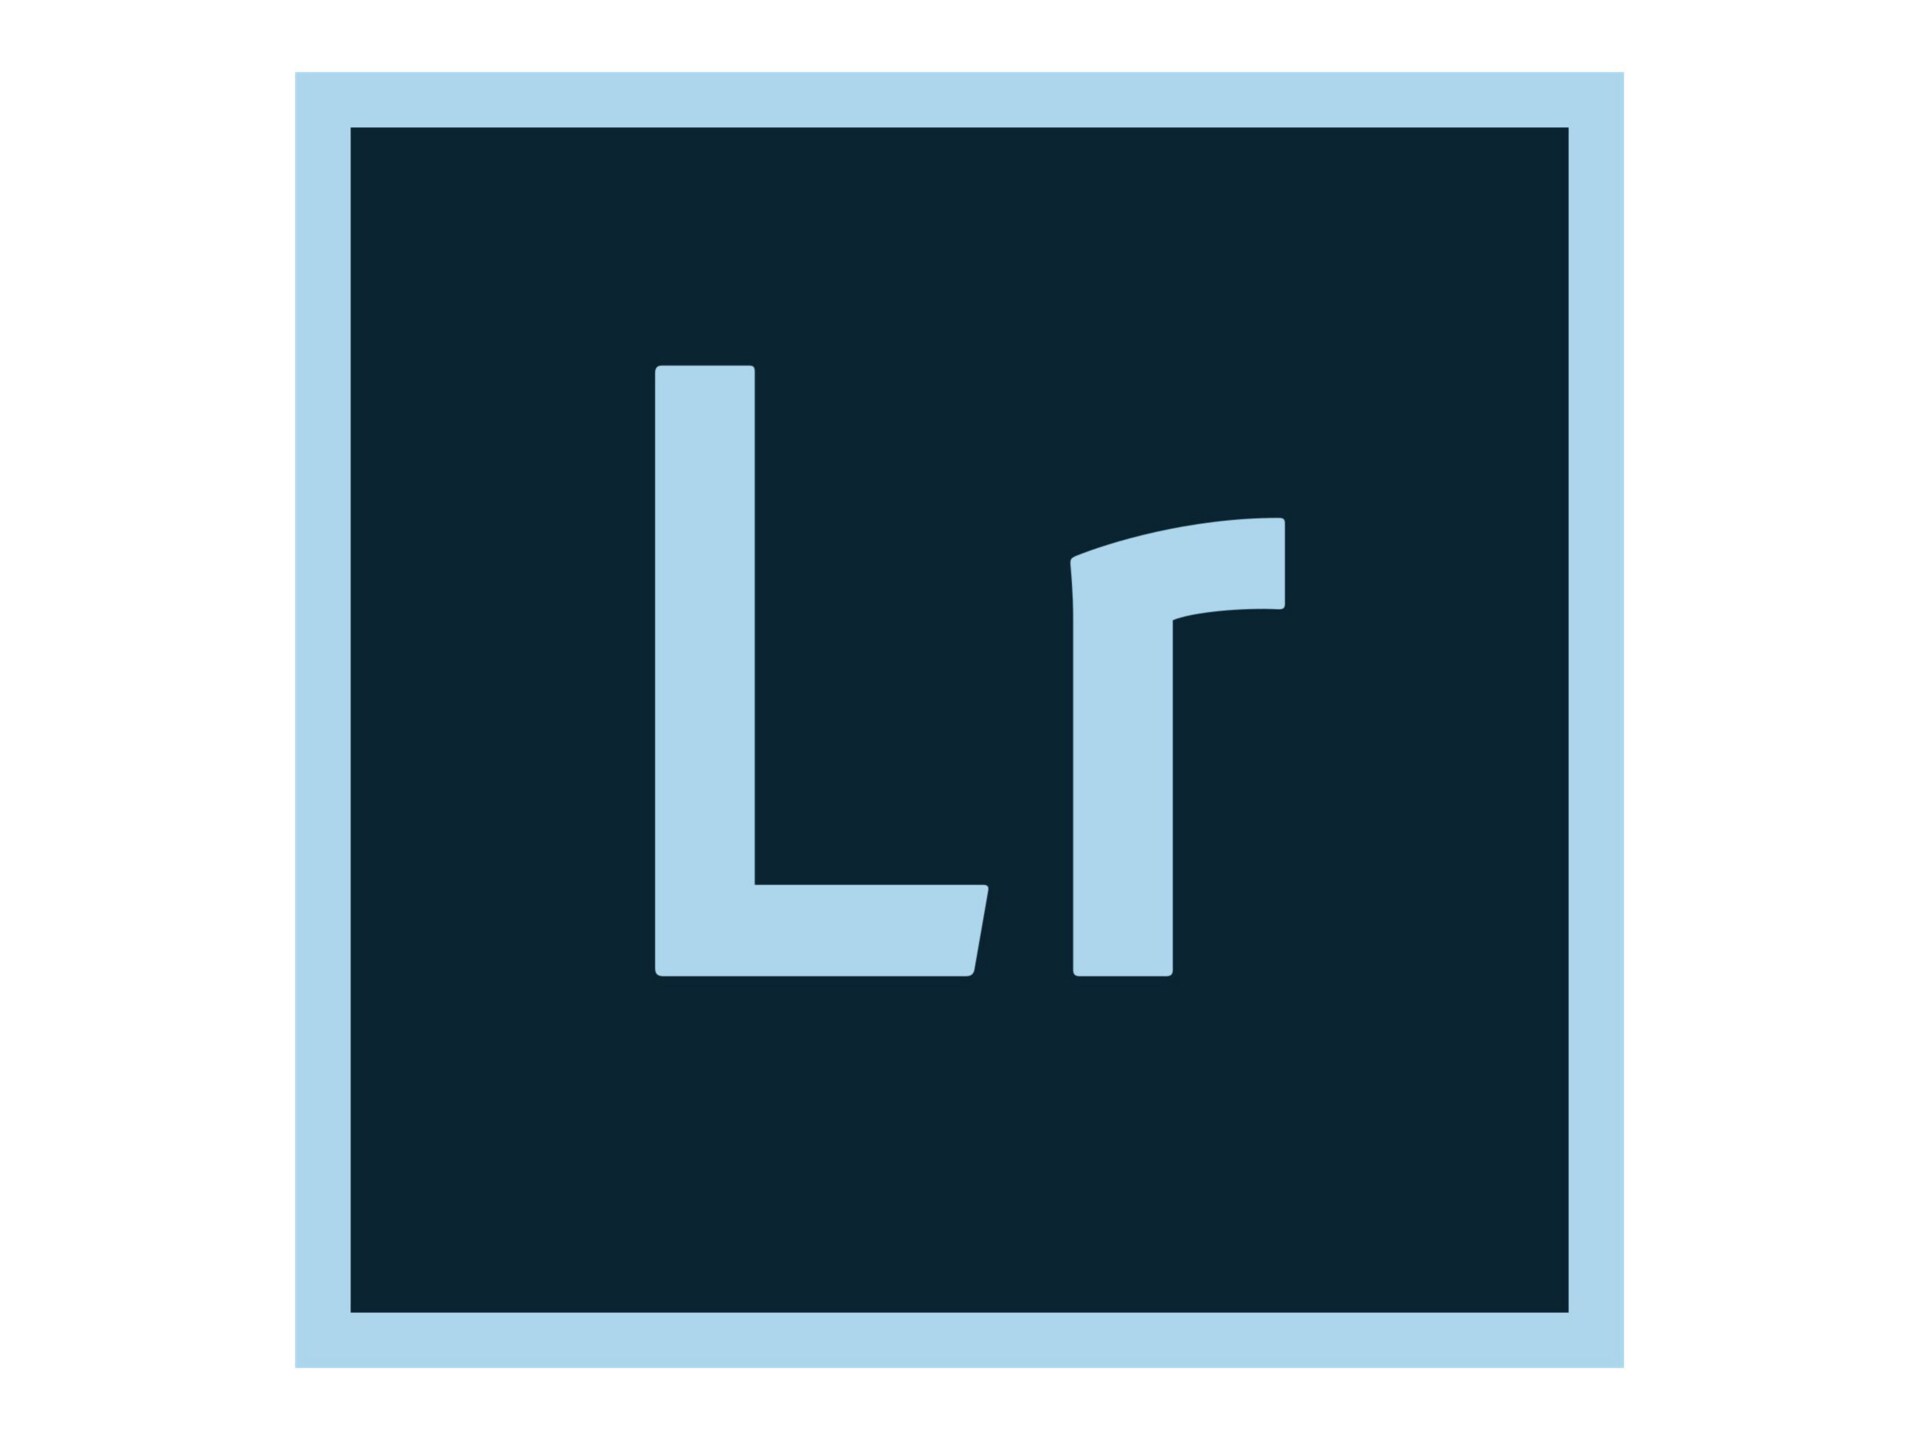 Adobe Photoshop Lightroom with Classic for Enterprise - Subscription New (1